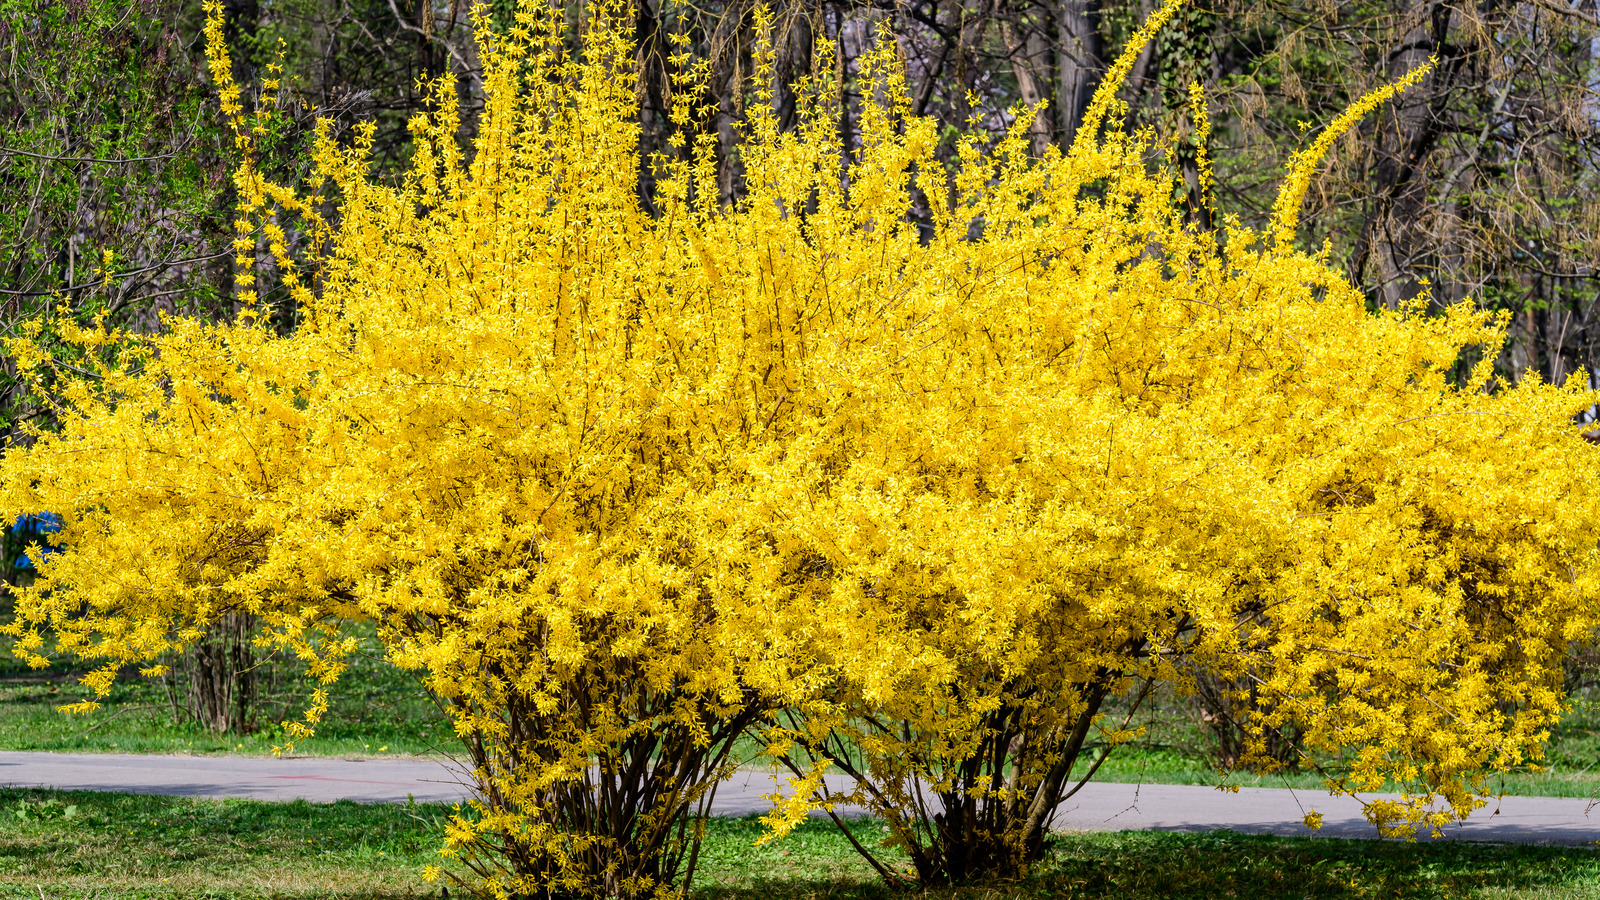 Cheat Winter: Force Forsythia Flowers & More To Bloom Indoors